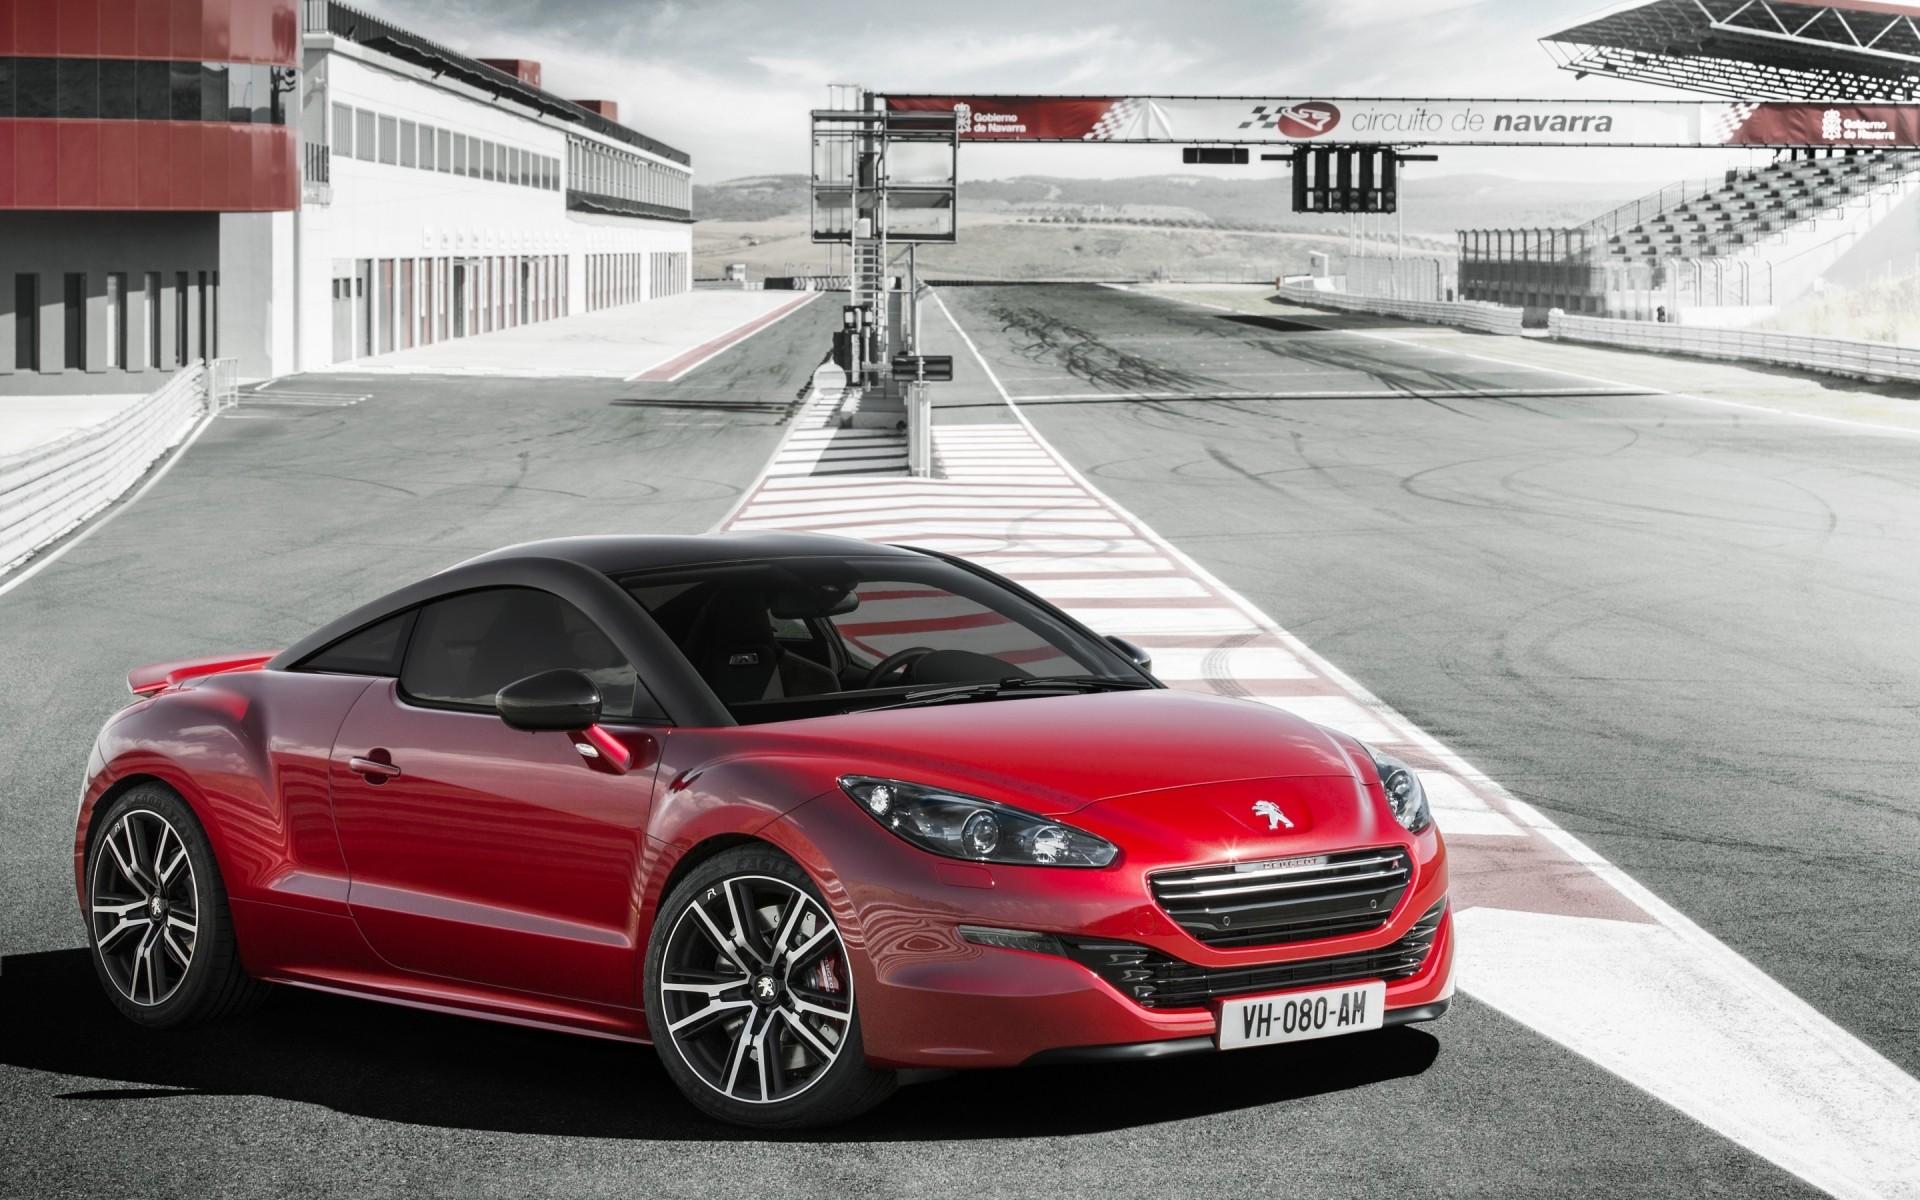 Peugeot RCZ R. Android wallpaper for free